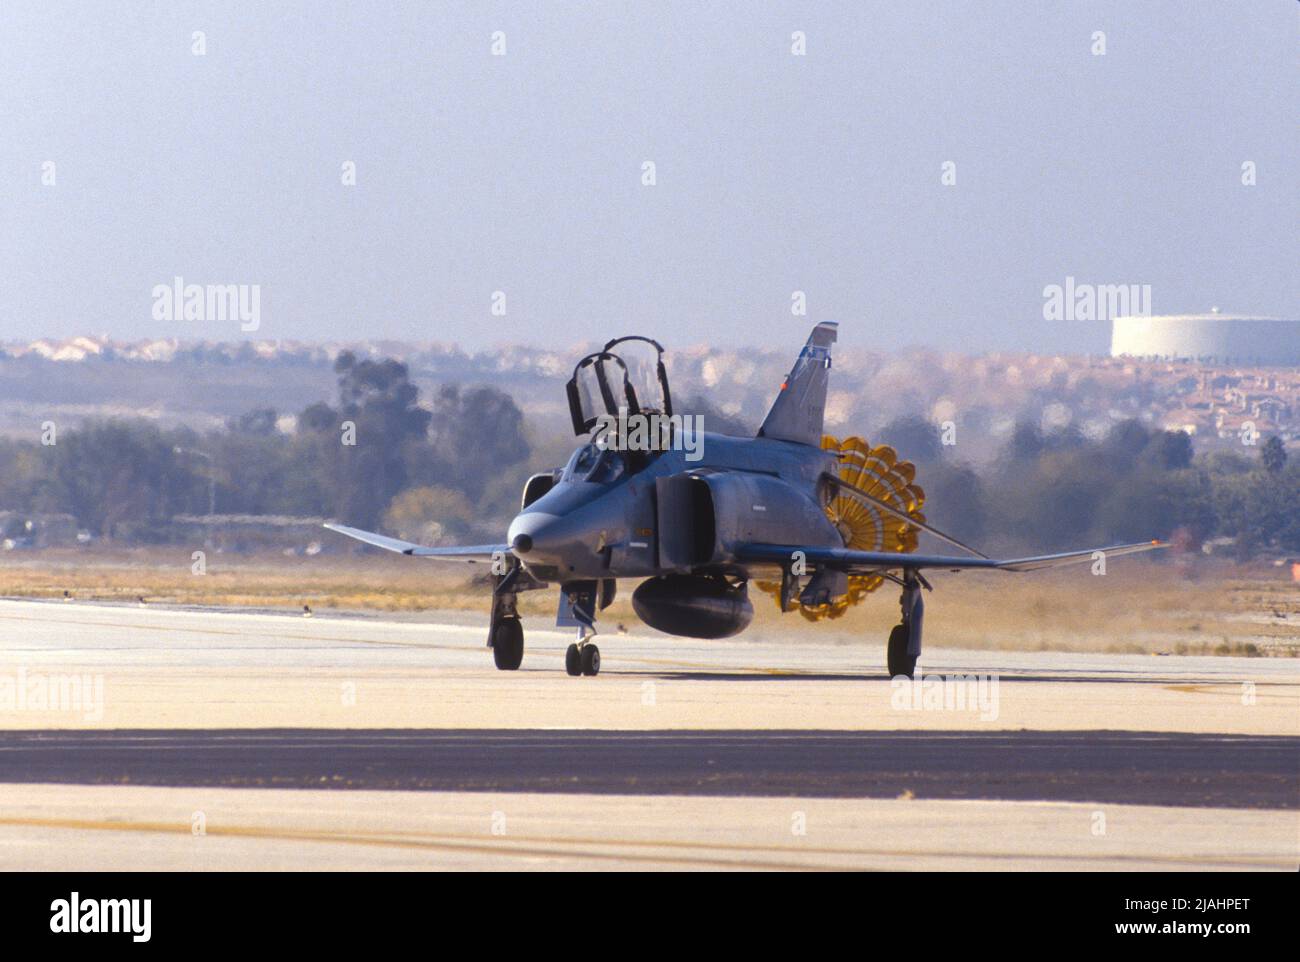 F4 Phantoms from 163rd Tactical Fighter Group, taxi at March Air Force Base in California after landing Stock Photo